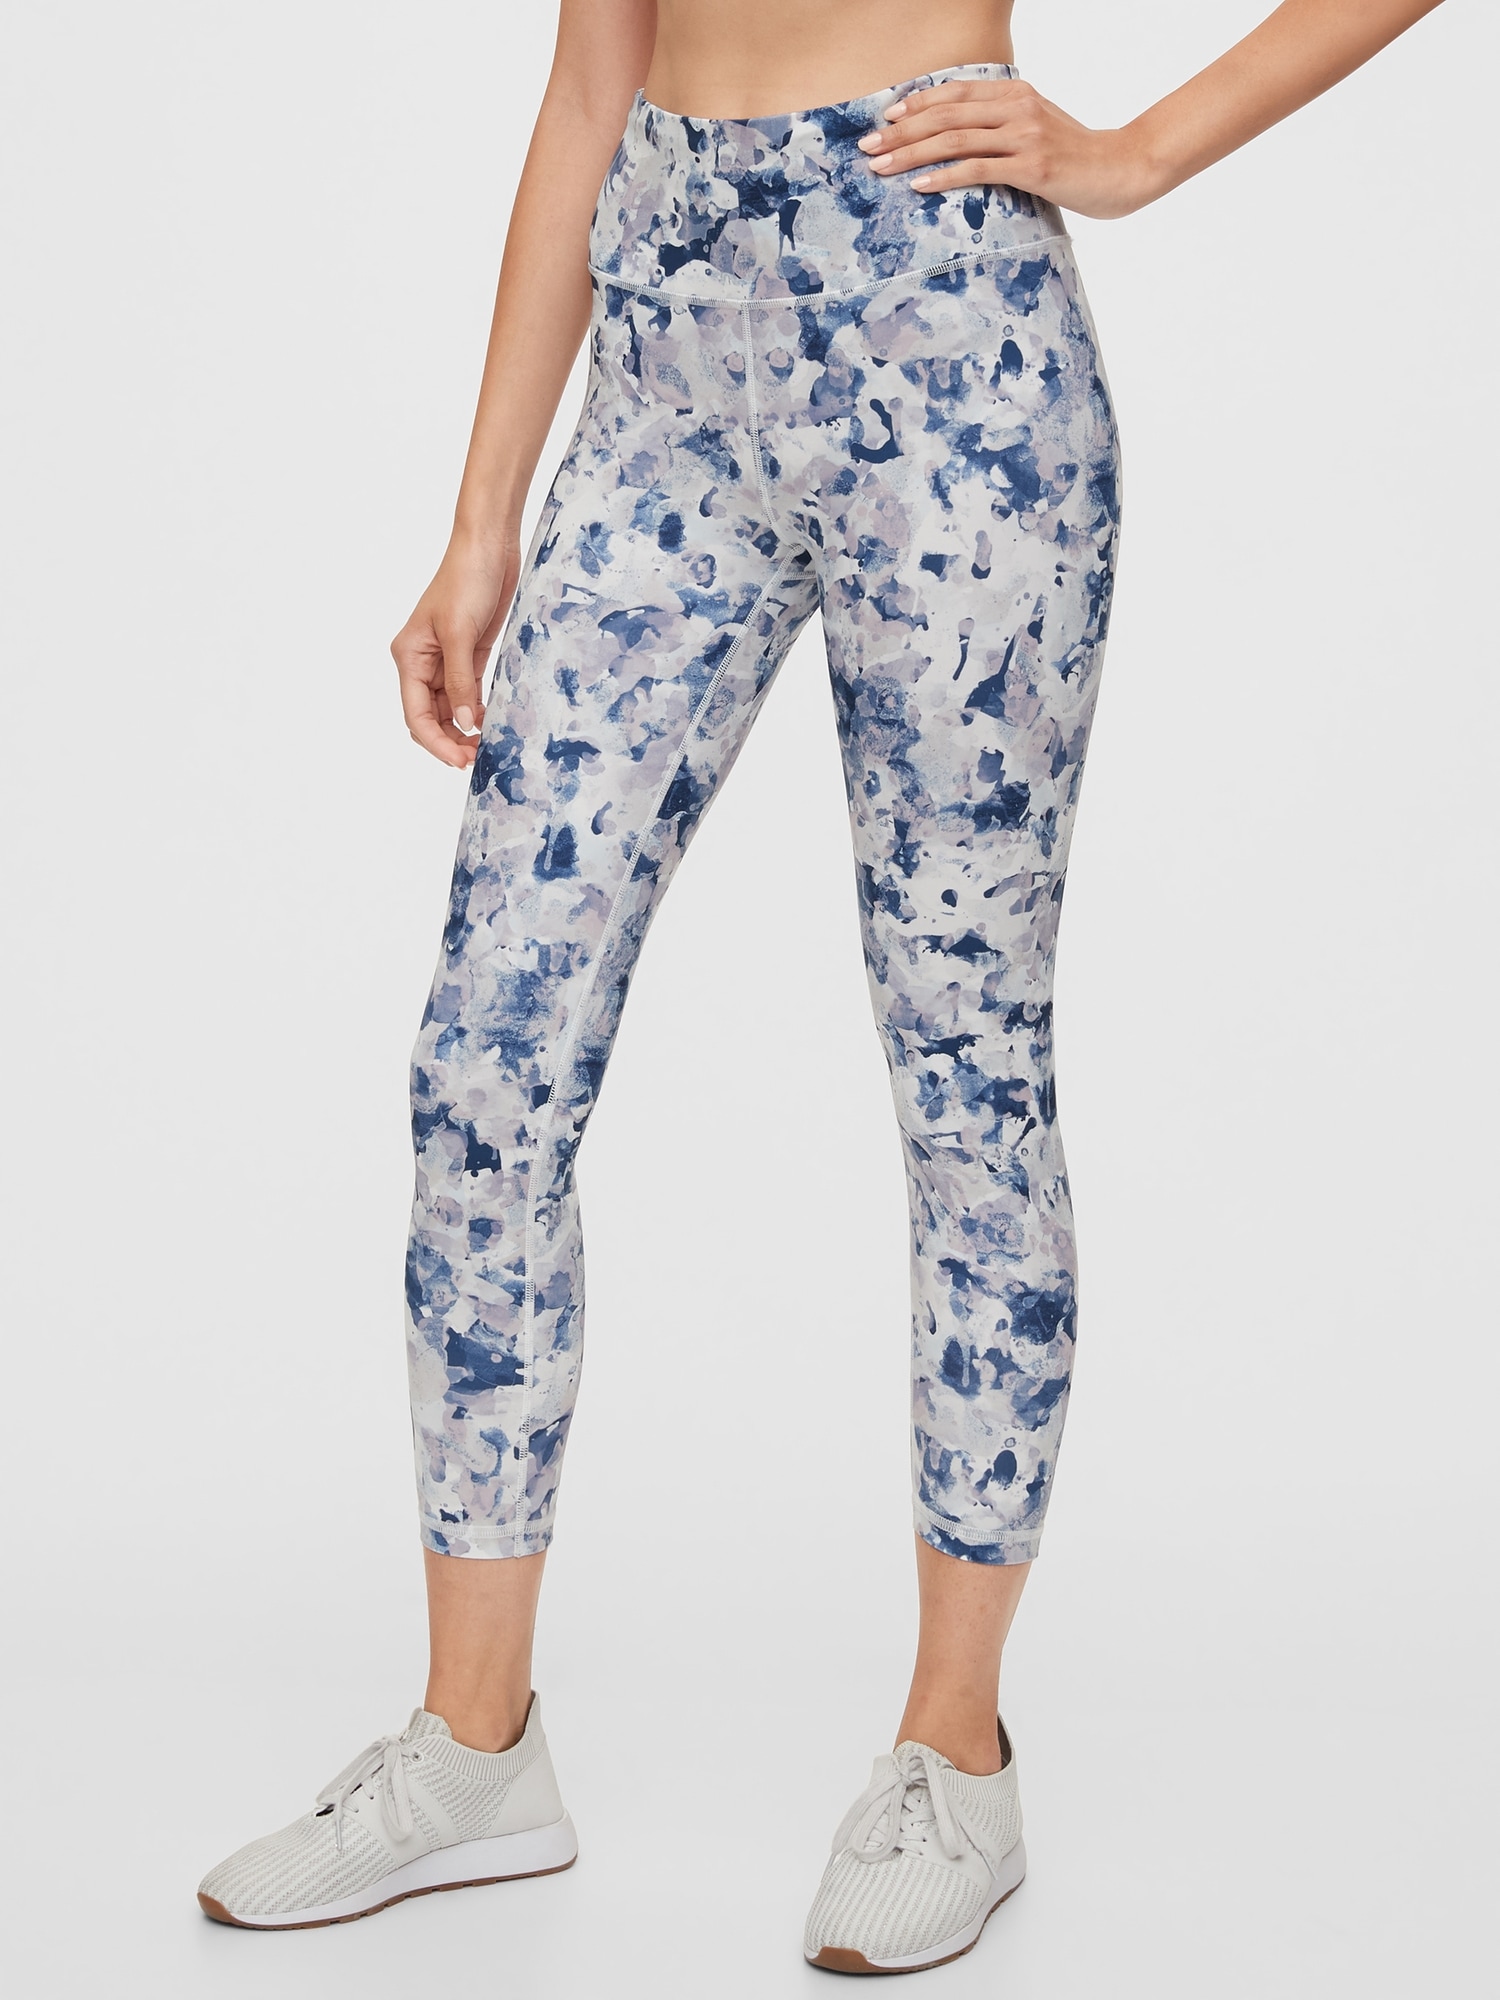 Gap GapFit High Rise Full Length Leggings in Eclipse, Psst! Get Them  Early! Shop the 22 Best Gap Black Friday Sales and Deals of 2020